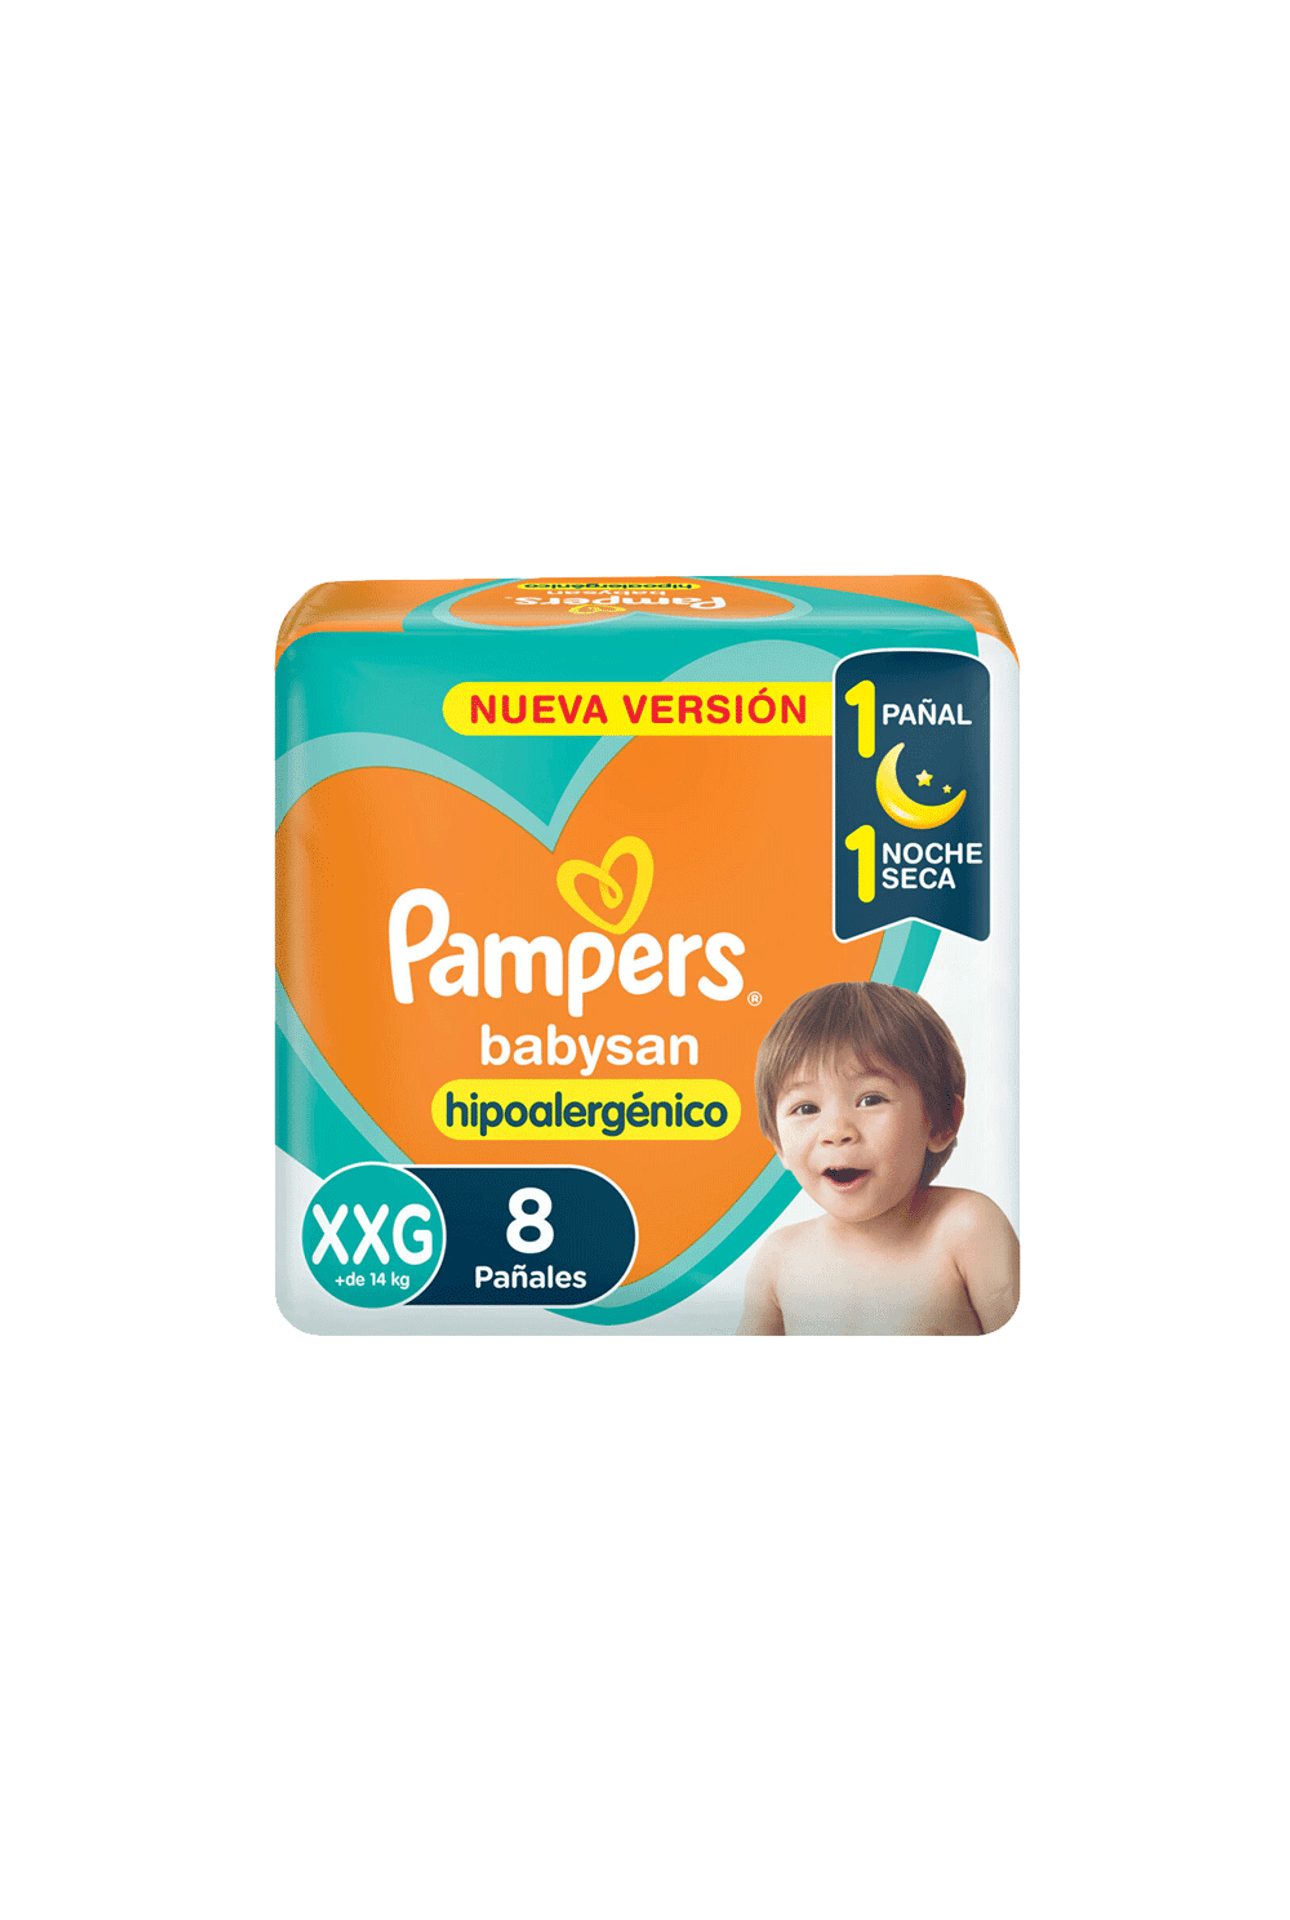 Pampers-Pañal-Pampers-Babysan-Talle-XXG-x-8-Unidades-7500435228657_img1